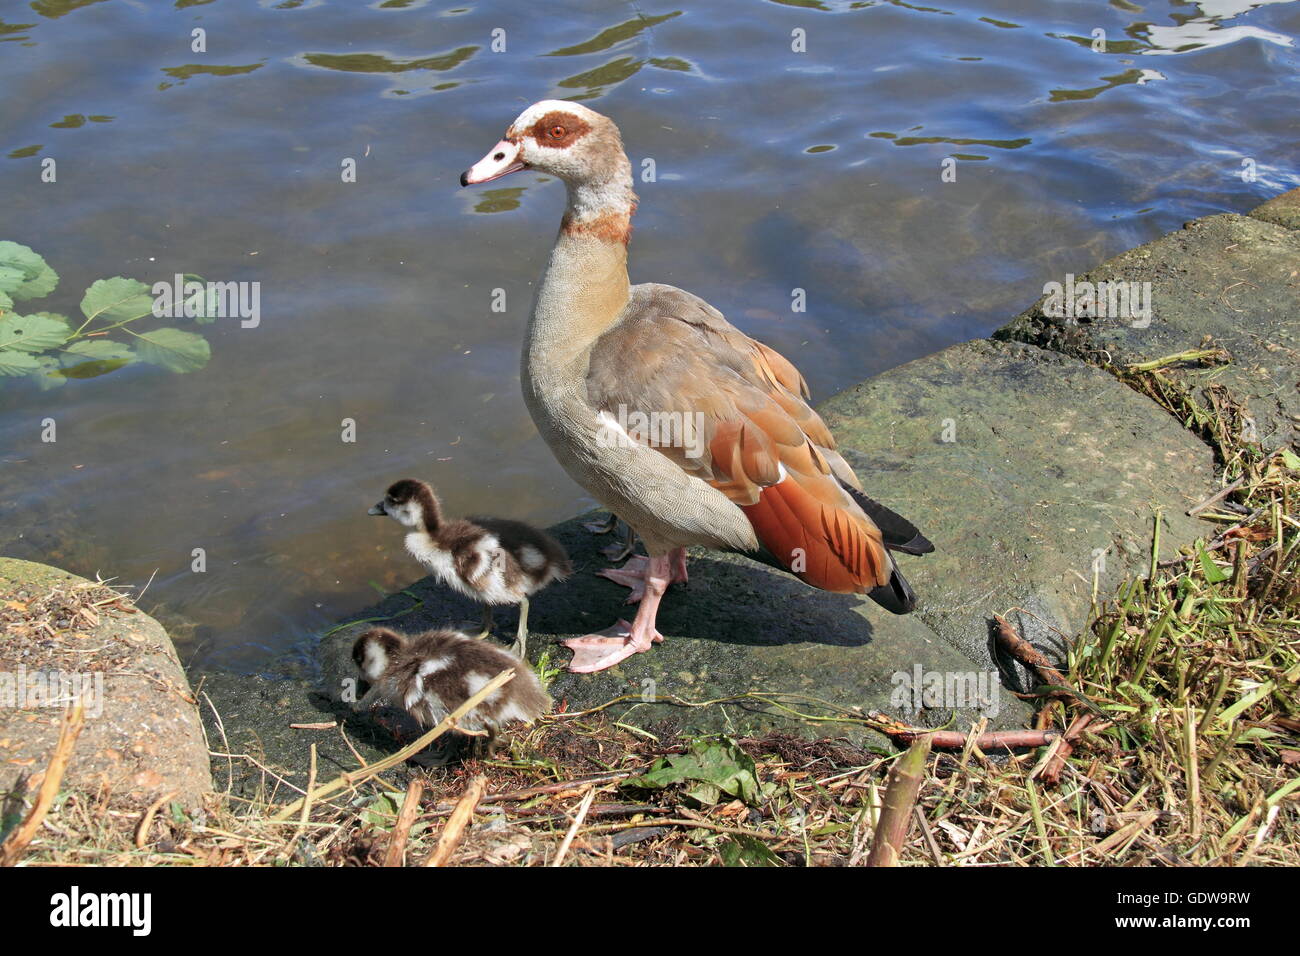 Egyptian Goose (Alopochen aegyptiacus) and two goslings, River Thames, East Molesey, Surrey, England, United Kingdom, Europe Stock Photo